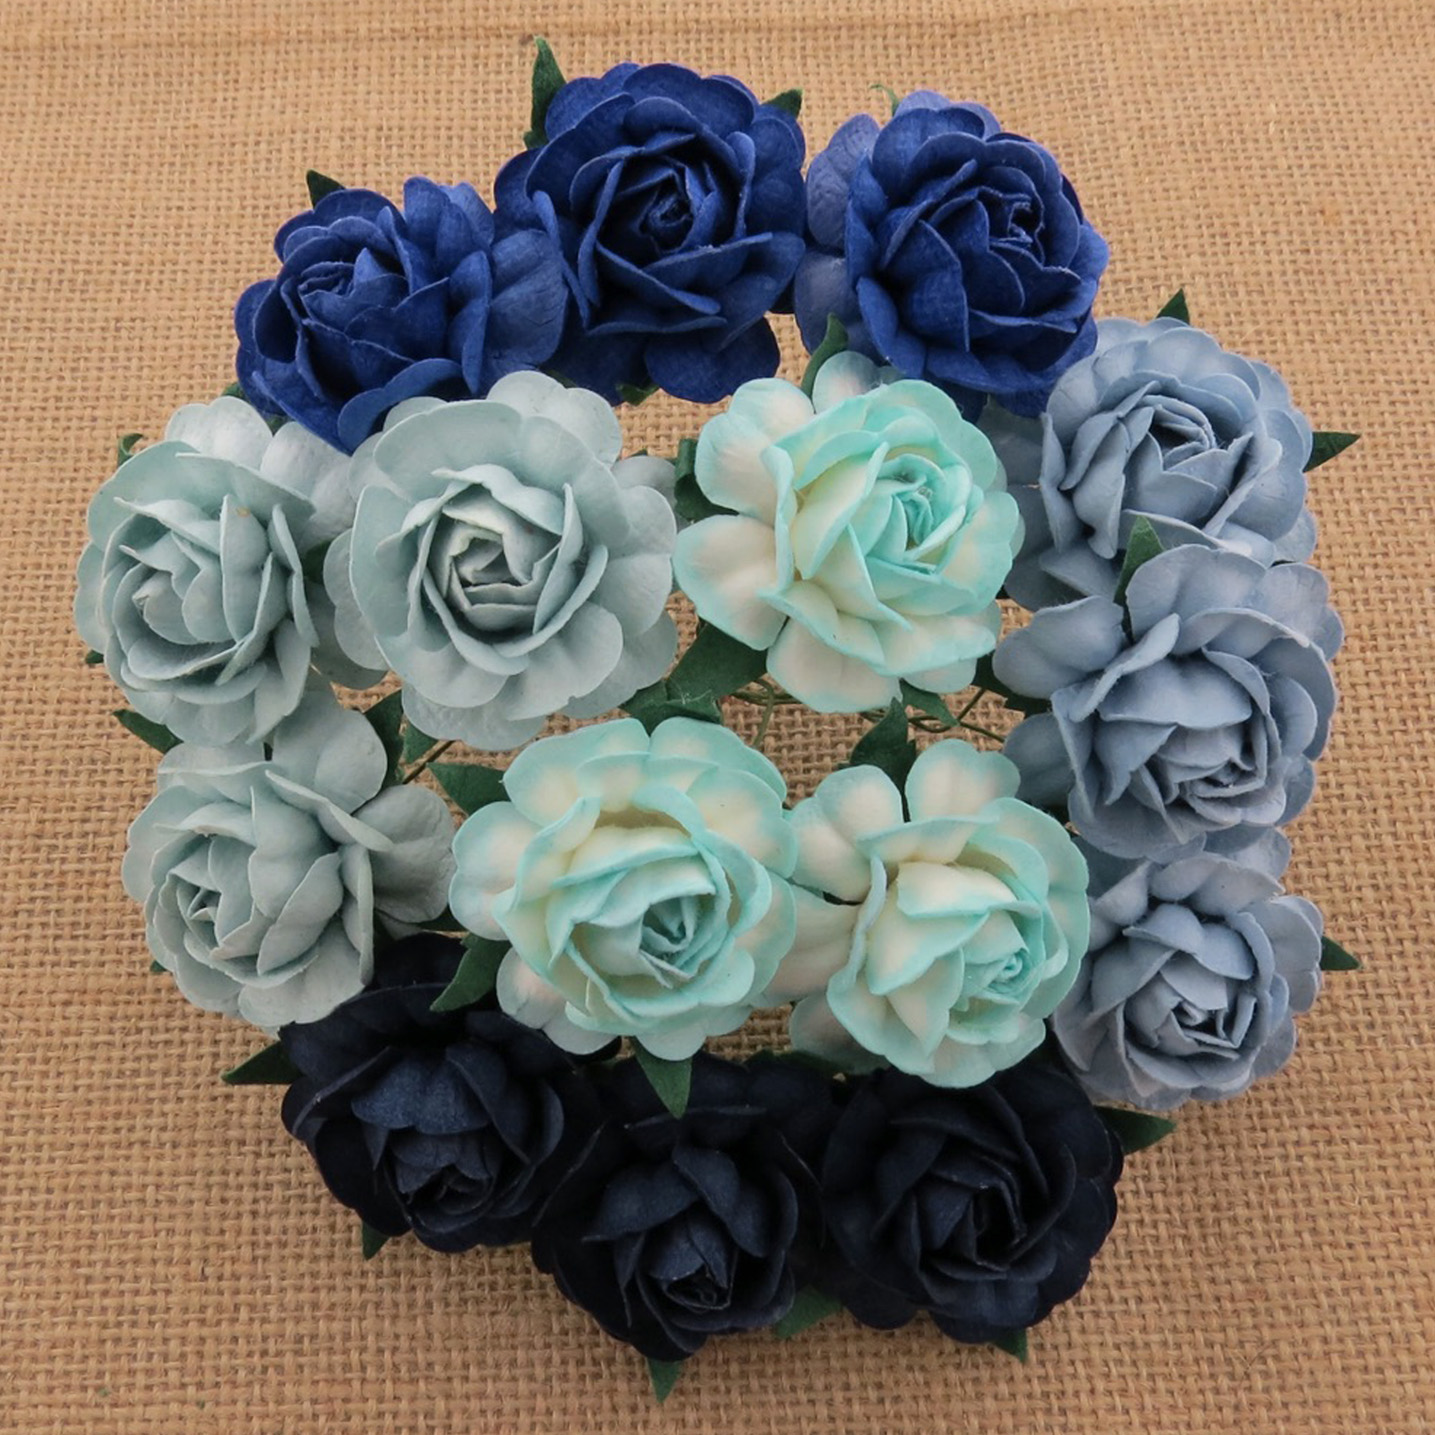 50 MIXED BLUE MULBERRY PAPER TEA ROSES 40mm - 5 COLOR